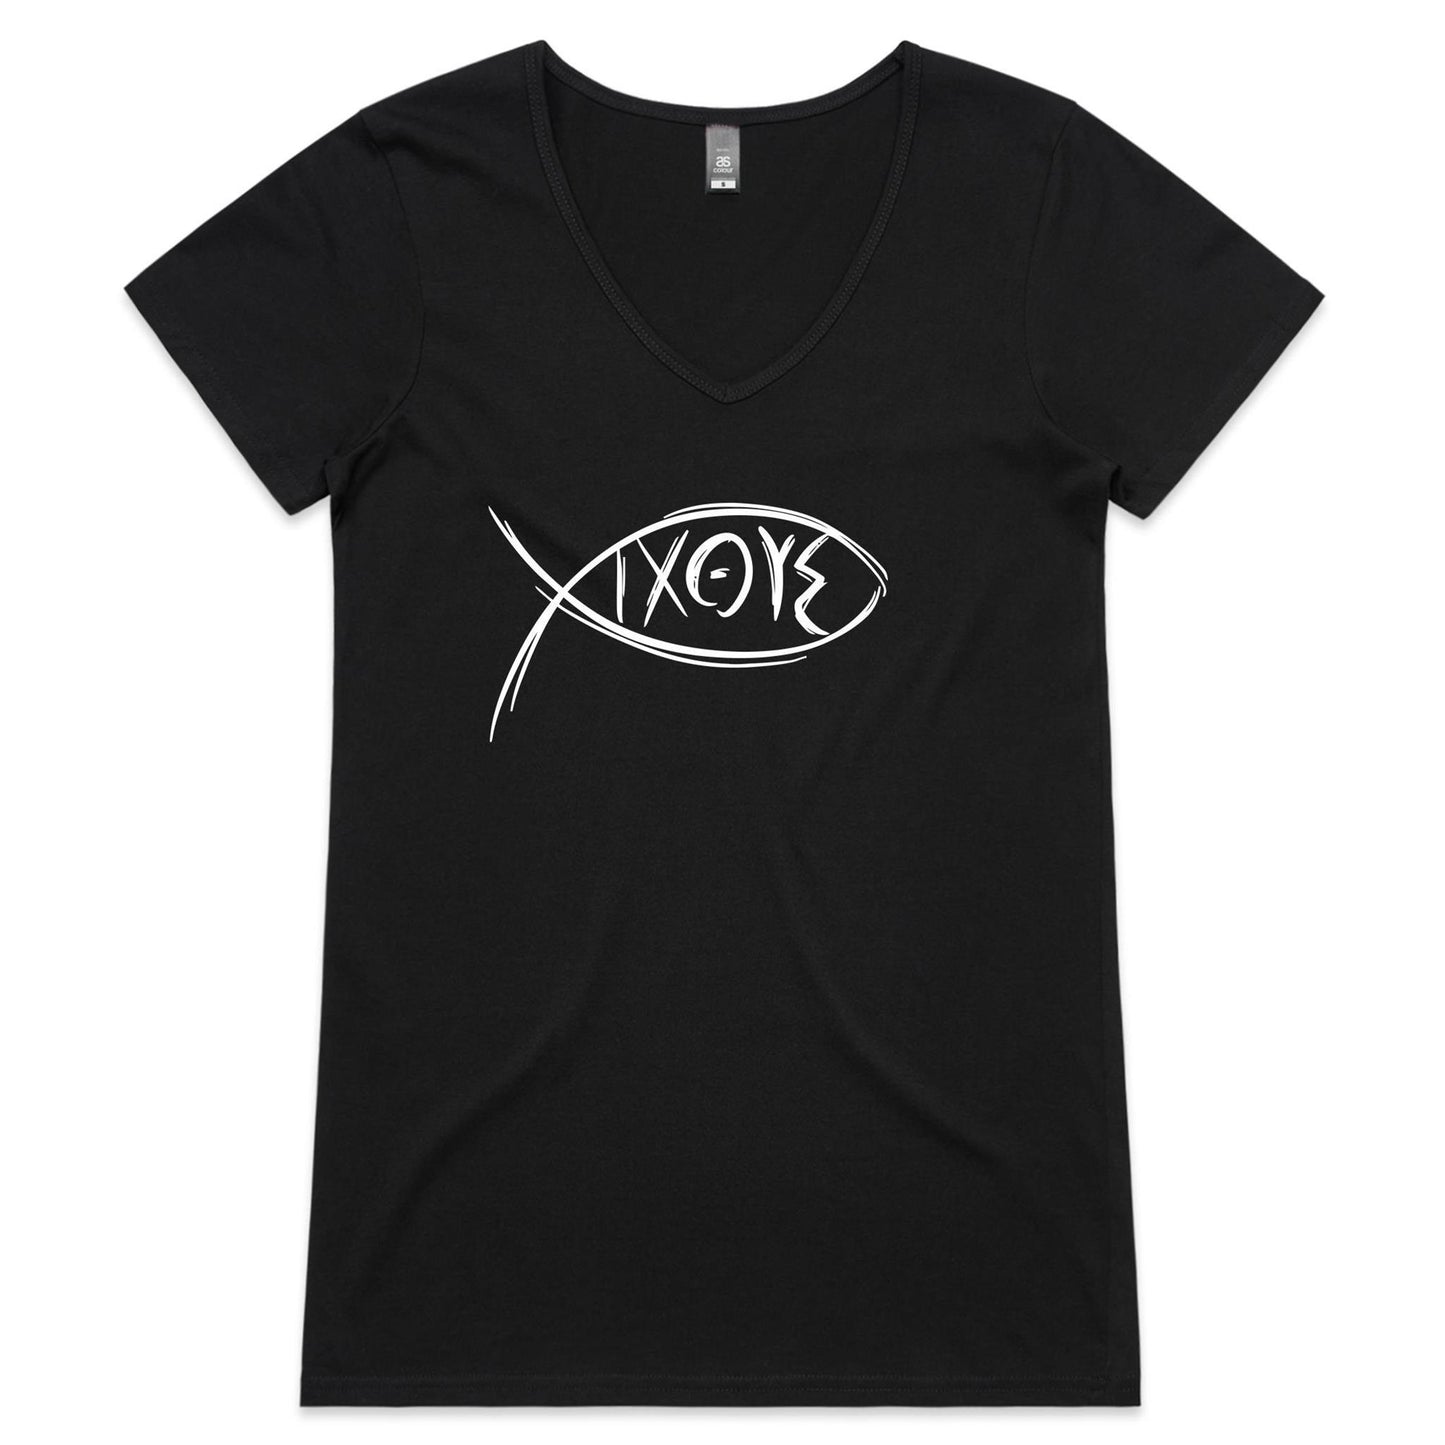 Womens V-Neck Cotton T-Shirt - Lost Manly Shop